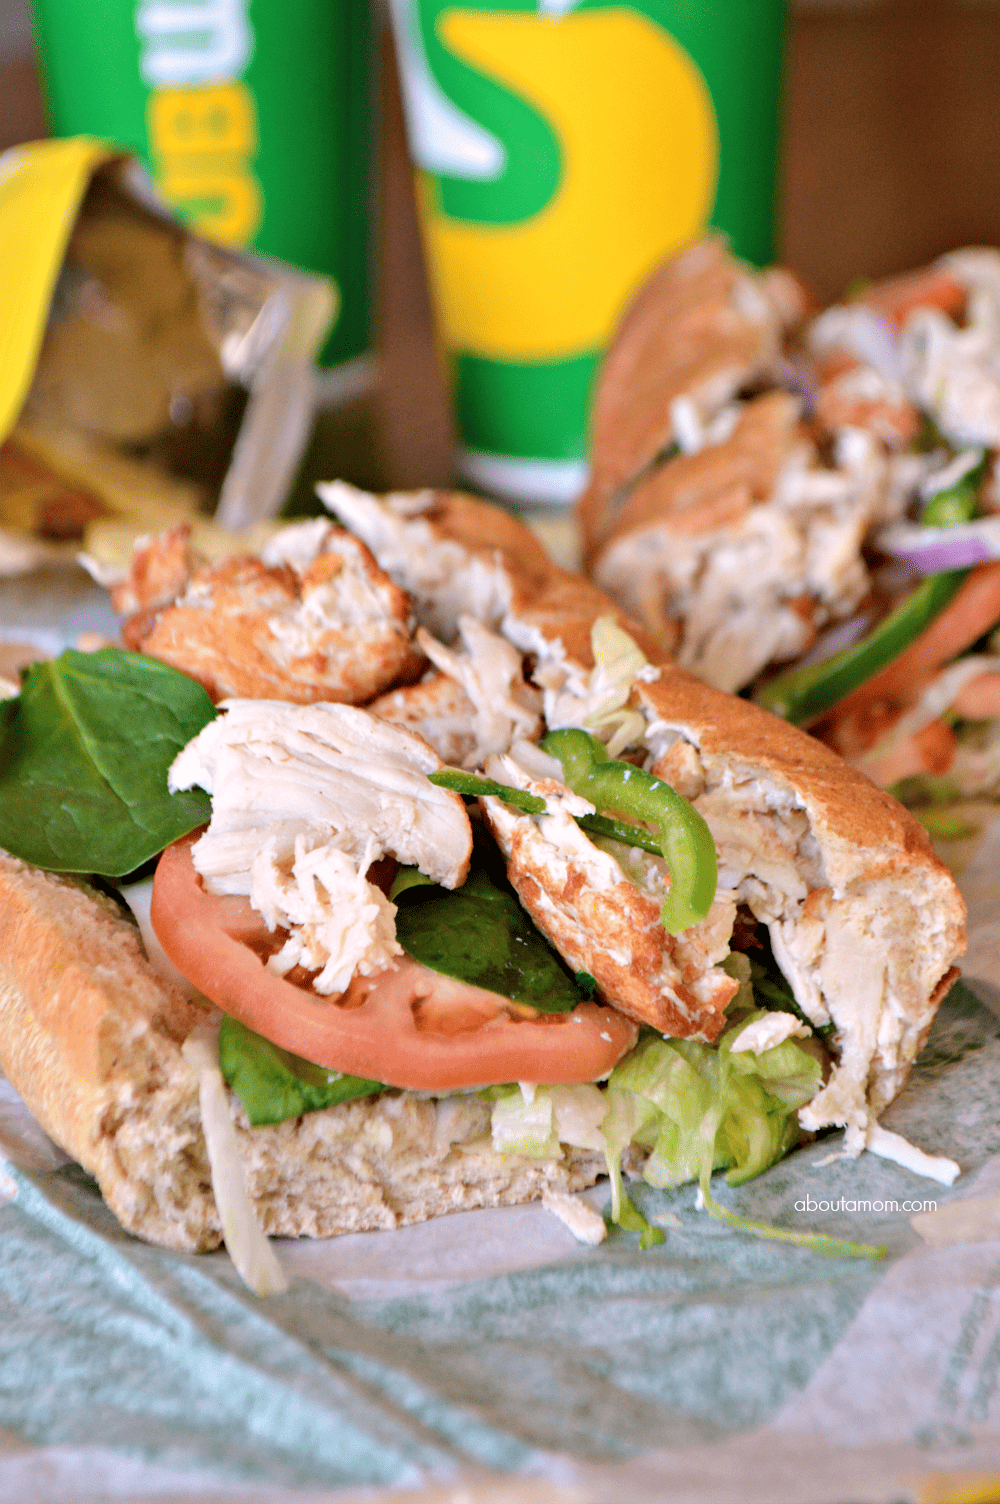 A delicious rotisserie-style chicken sandwich, made with tender, hand-pulled all white meat chicken, raised without antibiotics, and topped with flavorful crisp veggies on freshly baked bread.